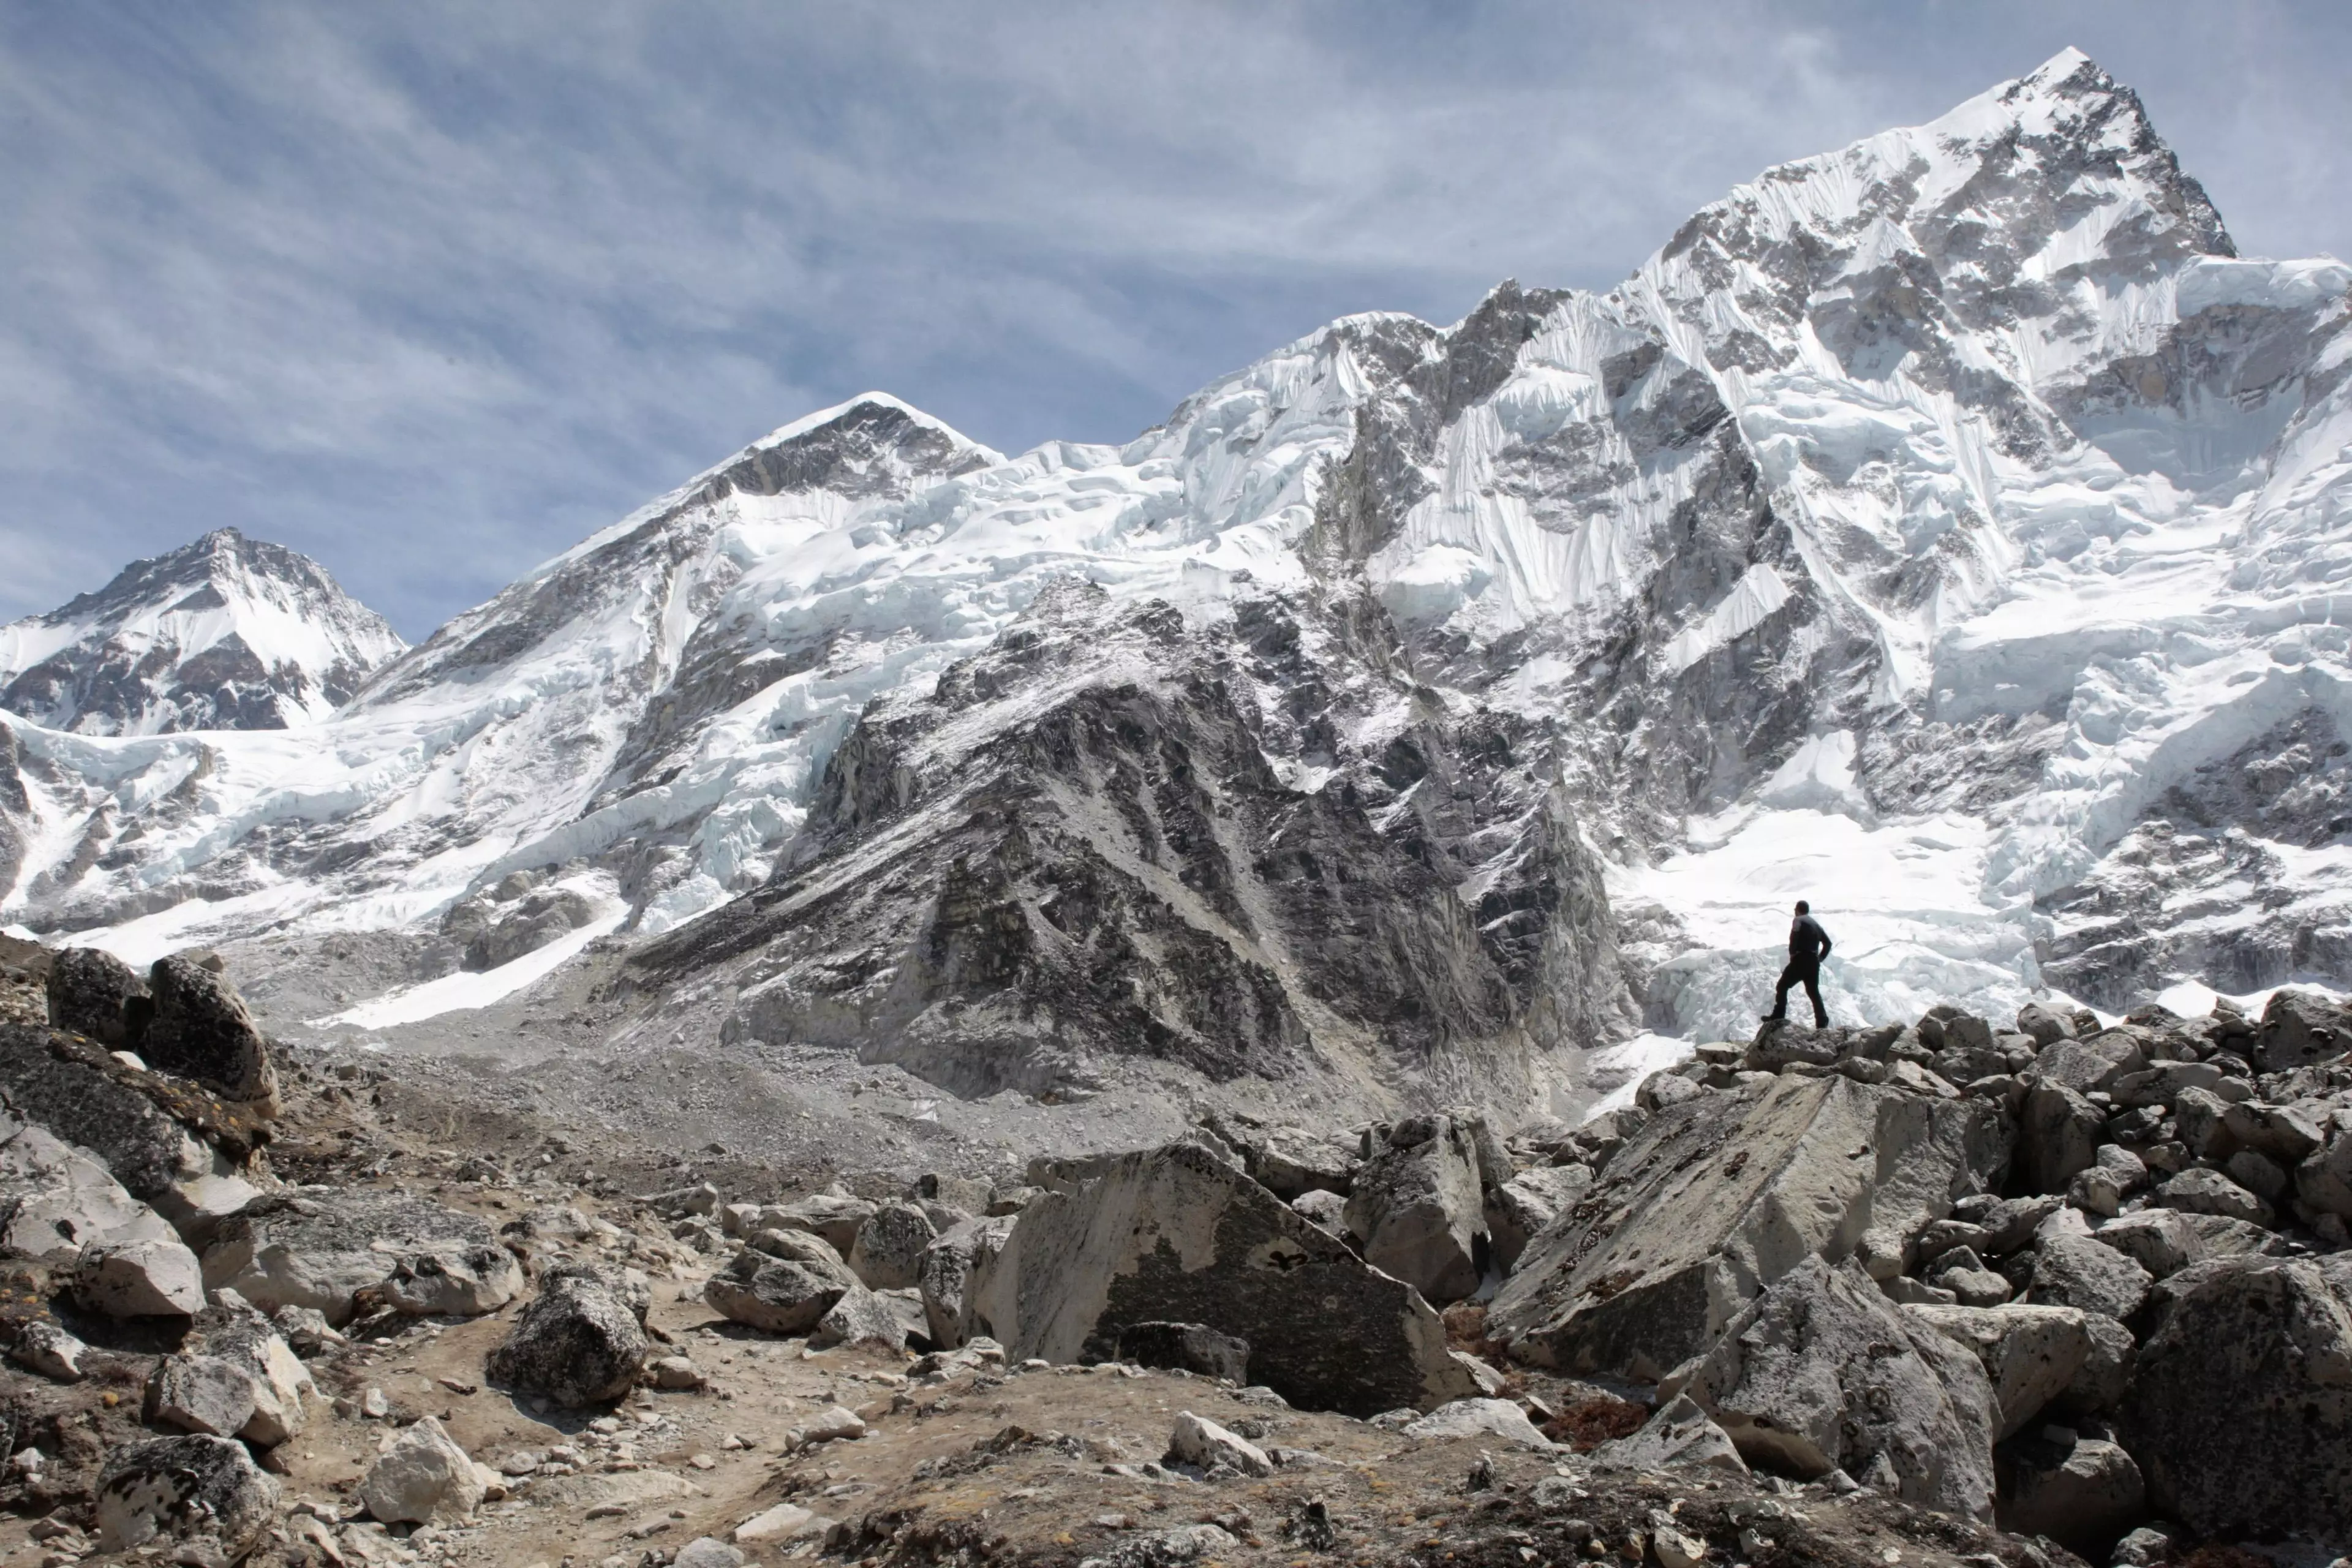 Mount Everest is one of the world's toughest challenges for explorers and adventurers.